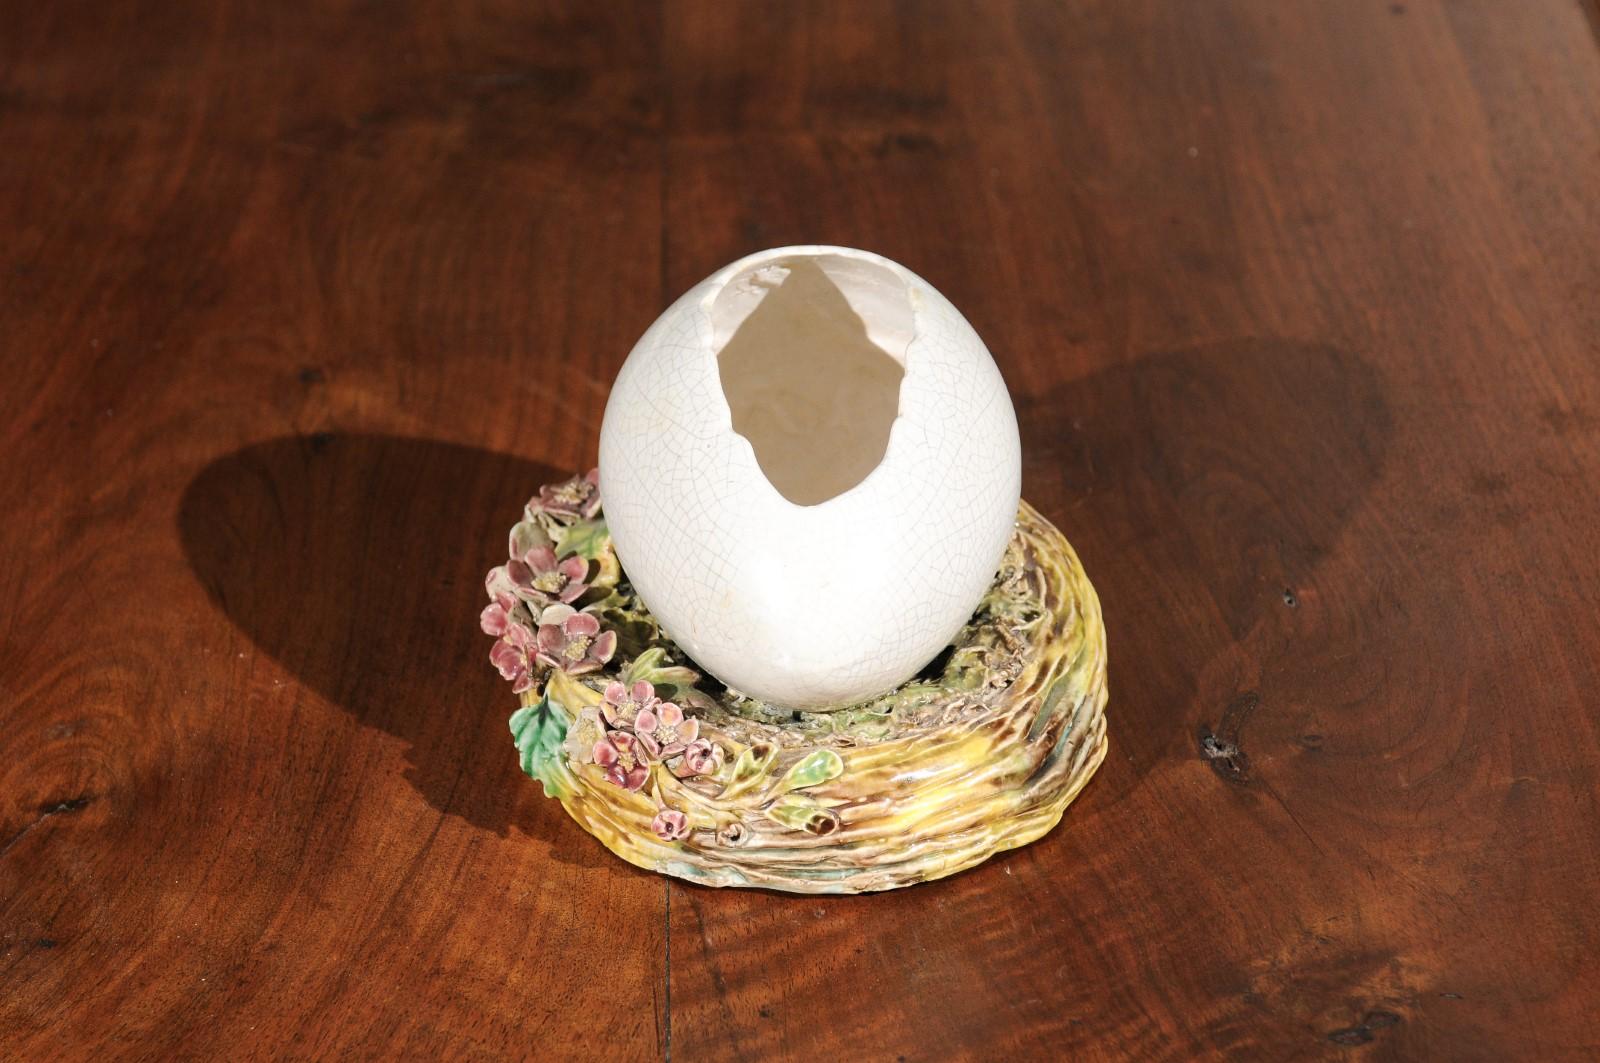 19th Century French 1890s Barbotine Majolica Egg Depicting a Cracked Shell on a Floral Nest